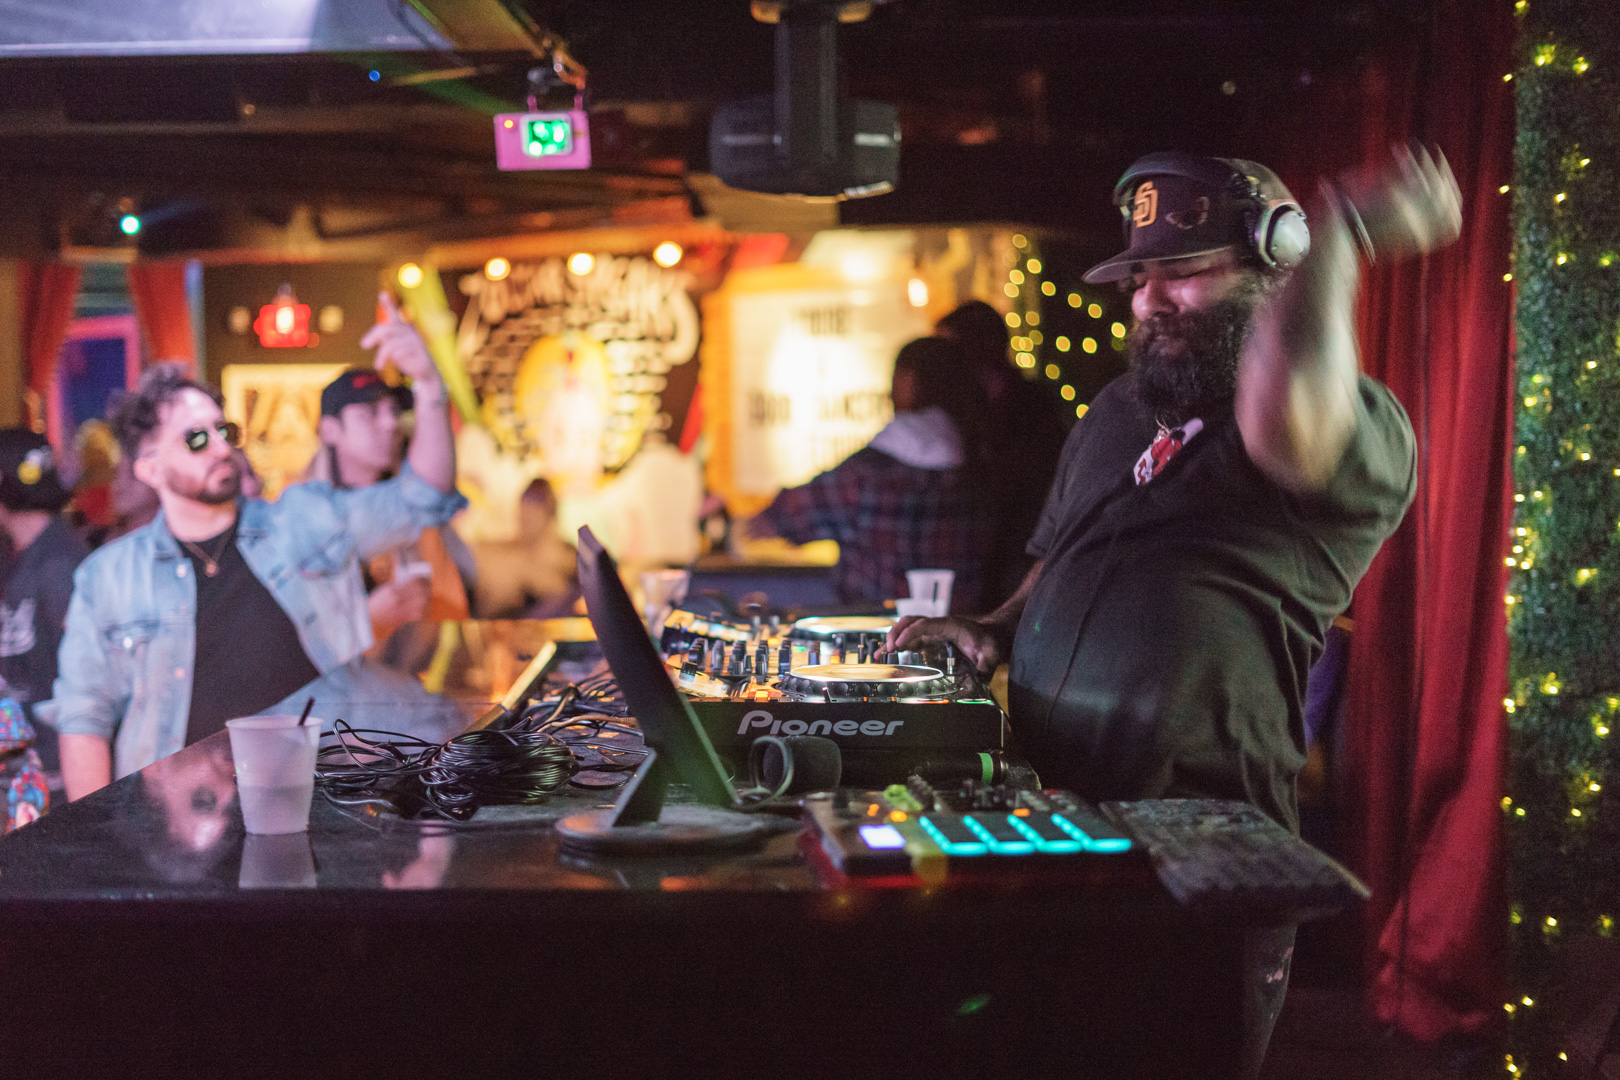 A dj spins the turntables while a party goer has his arm up in front